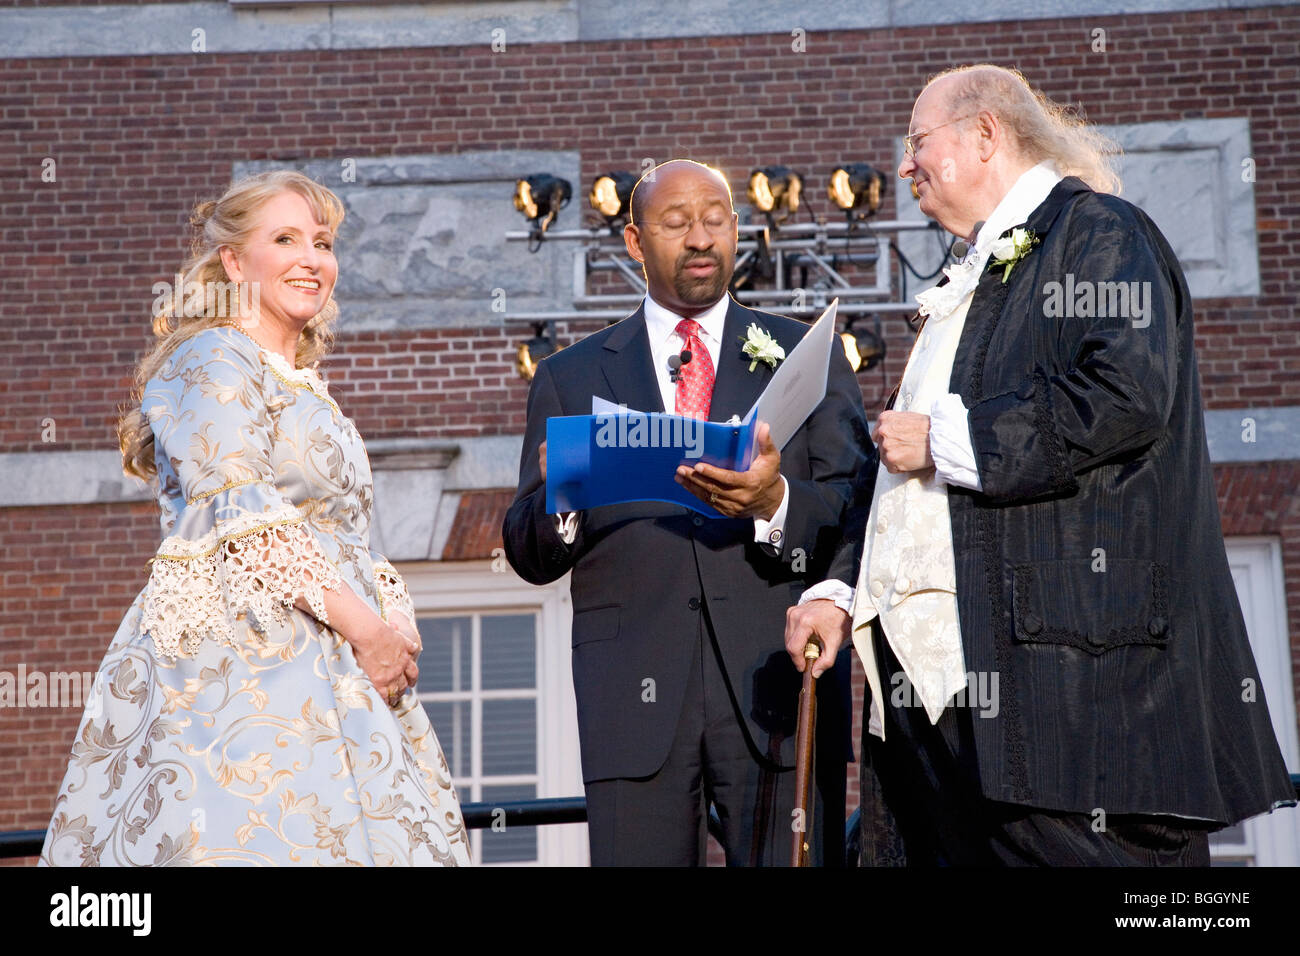 Philadelphia Mayor Michael Nutter marrying Ben Franklin and Betsy Ross on July 3, 2008 in front of Independence Hall, Philadelph Stock Photo